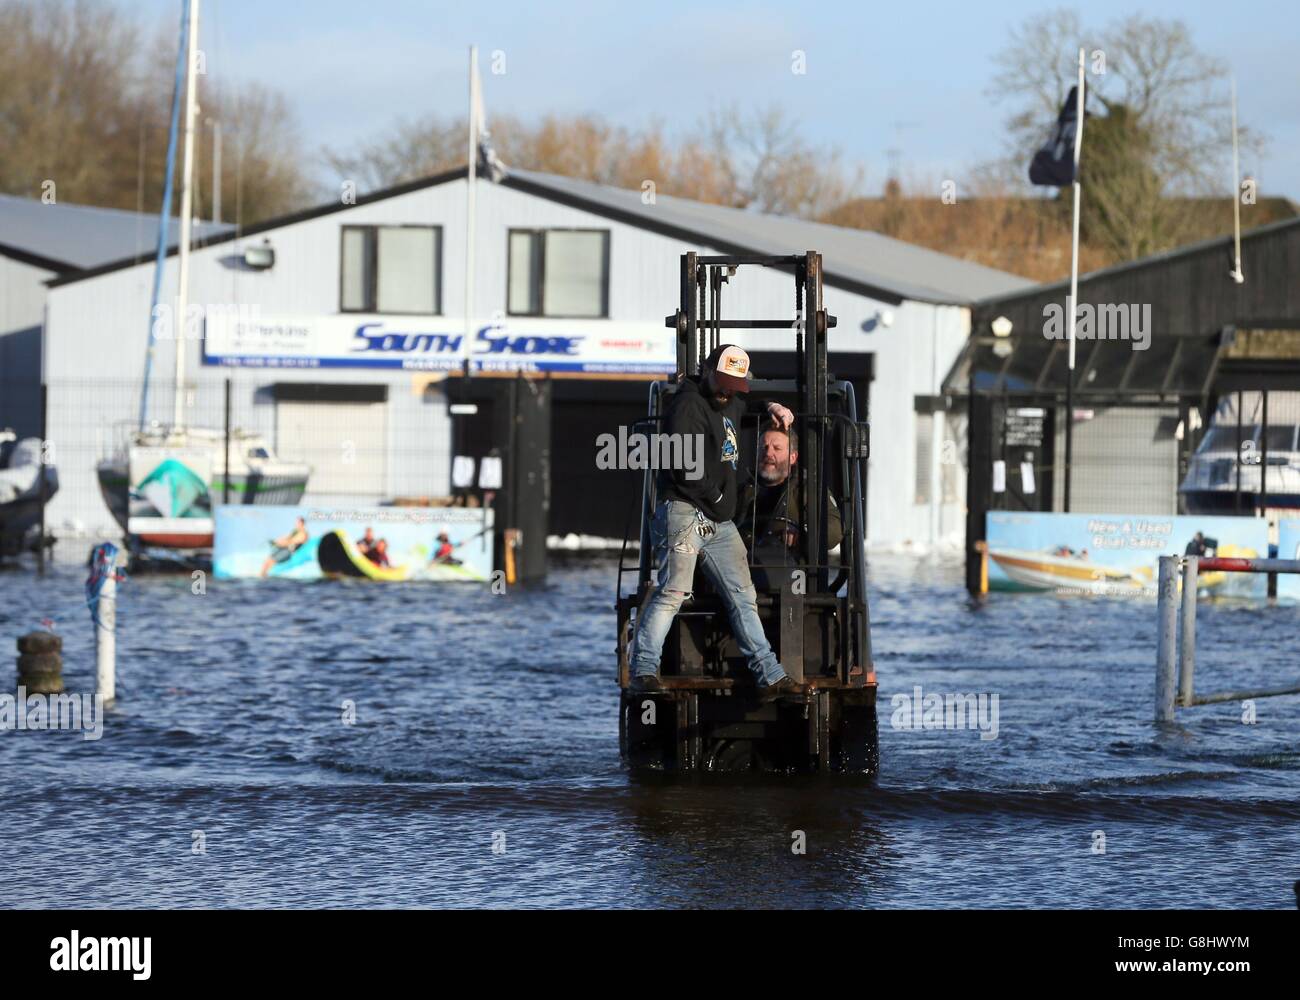 Business owners use a fork lift truck to cross flood waters at Kinnago Marina, near Dungannon, which is affected by the rising water levels in Lough Neagh. Stock Photo